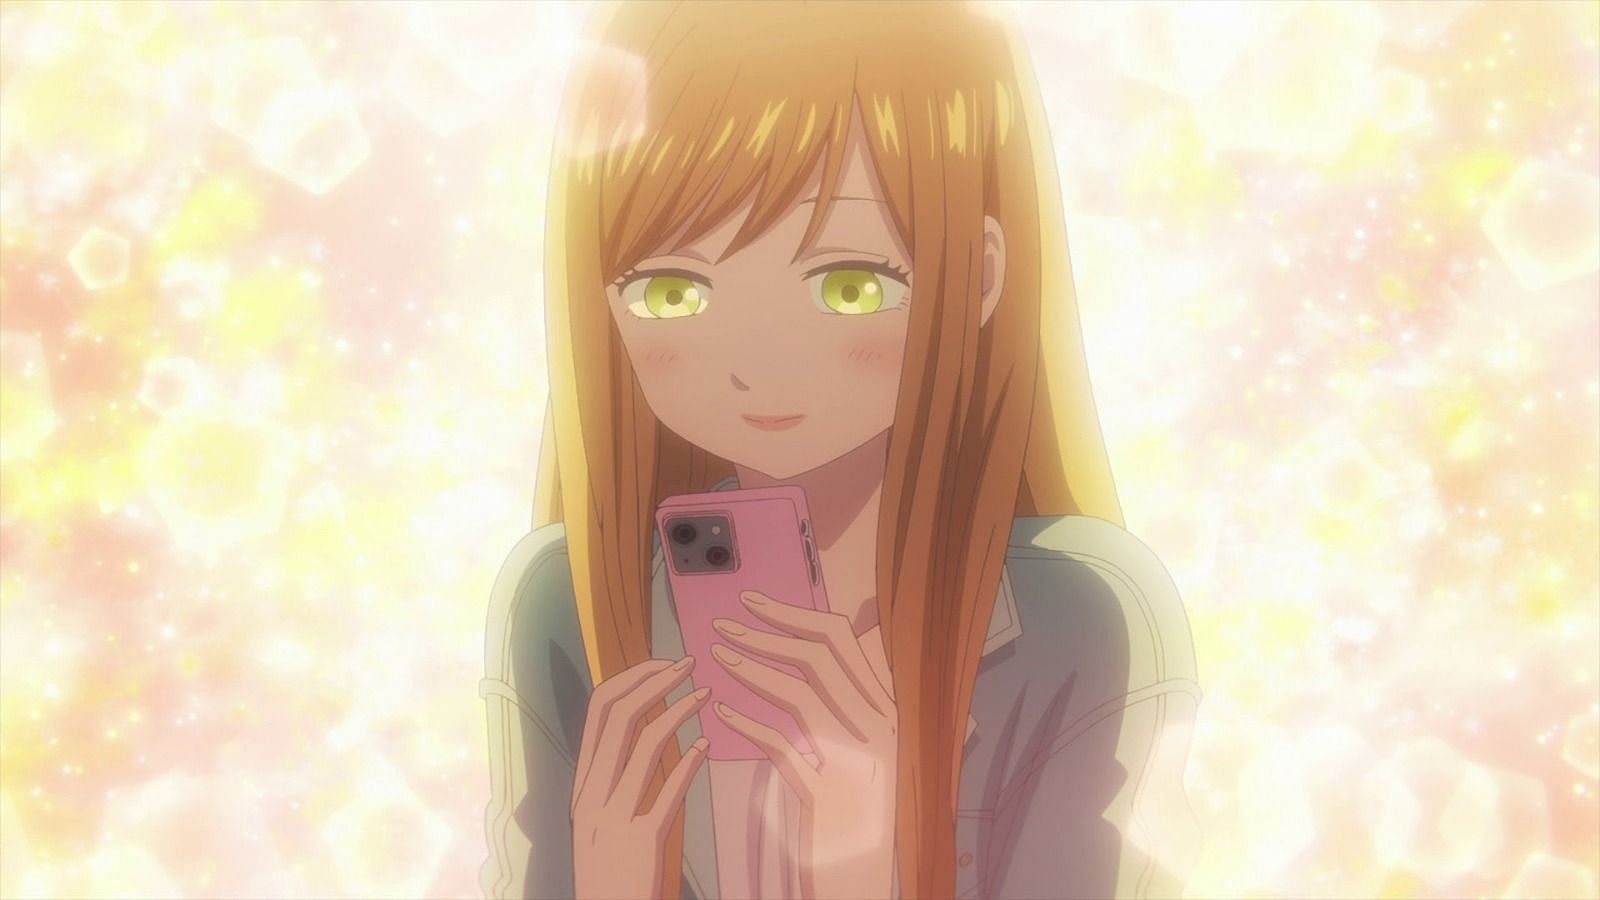 My Love story with Yamada-kun at Lv999: Release date, what to expect, plot,  and more